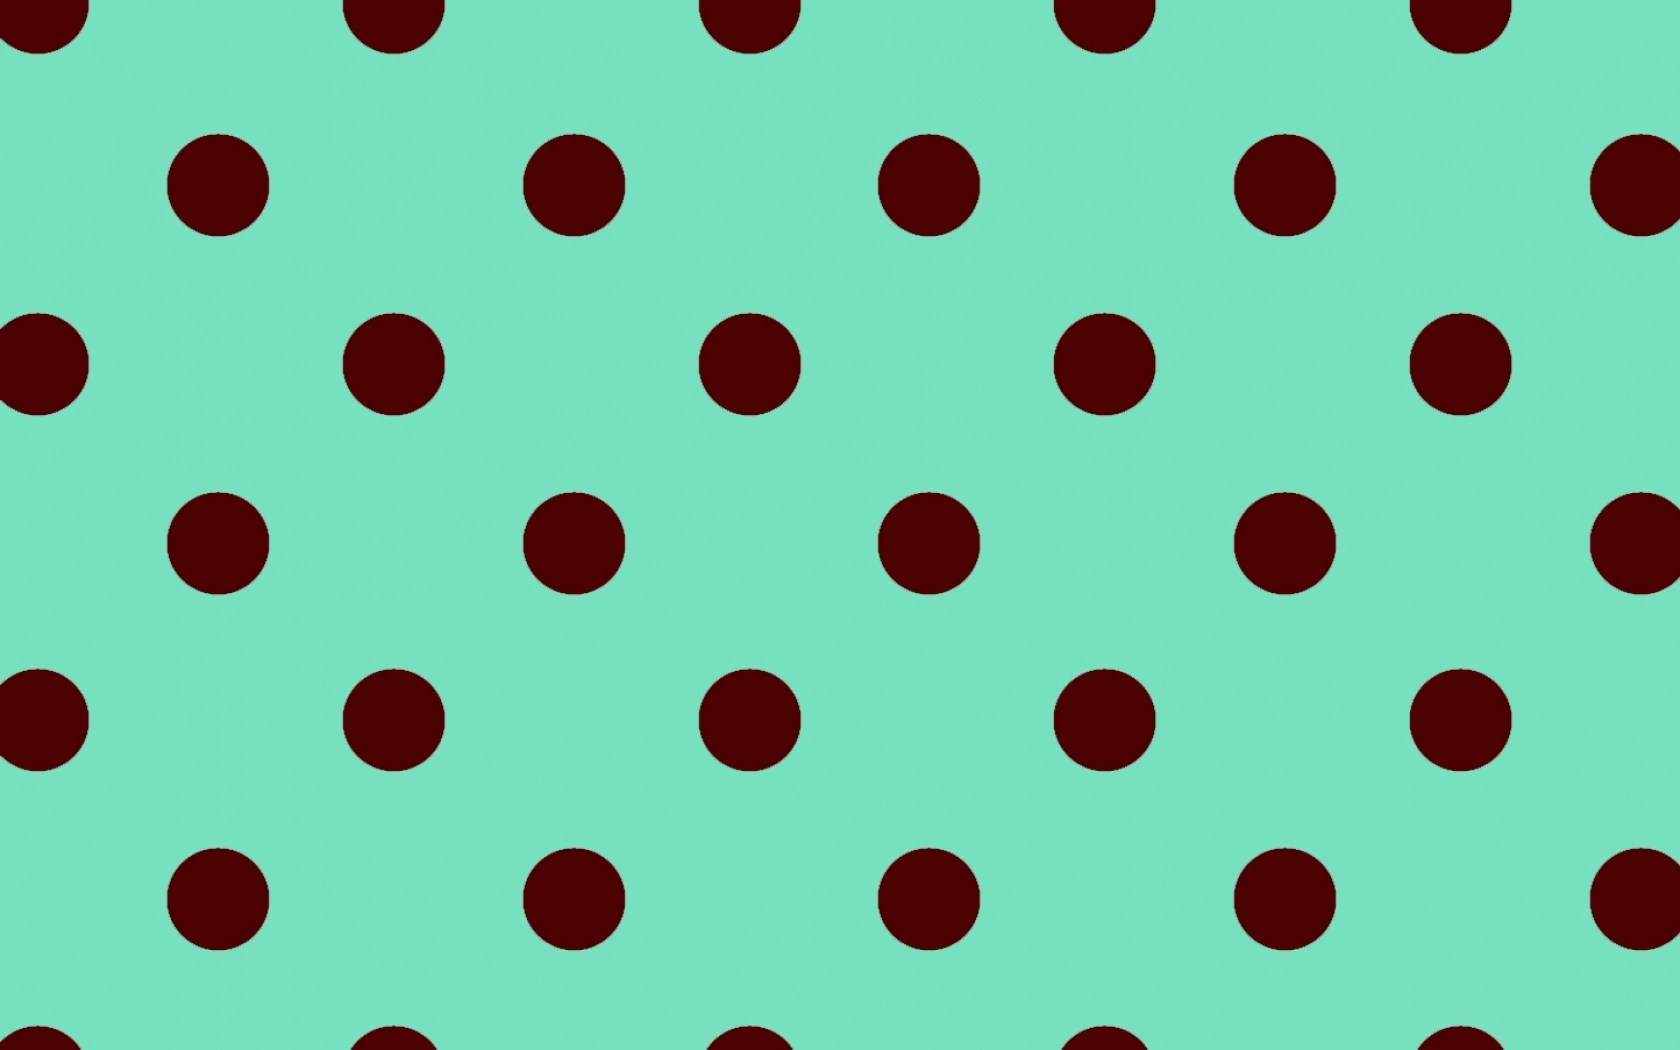 Related images of polka dot iphone wallpaper 6: